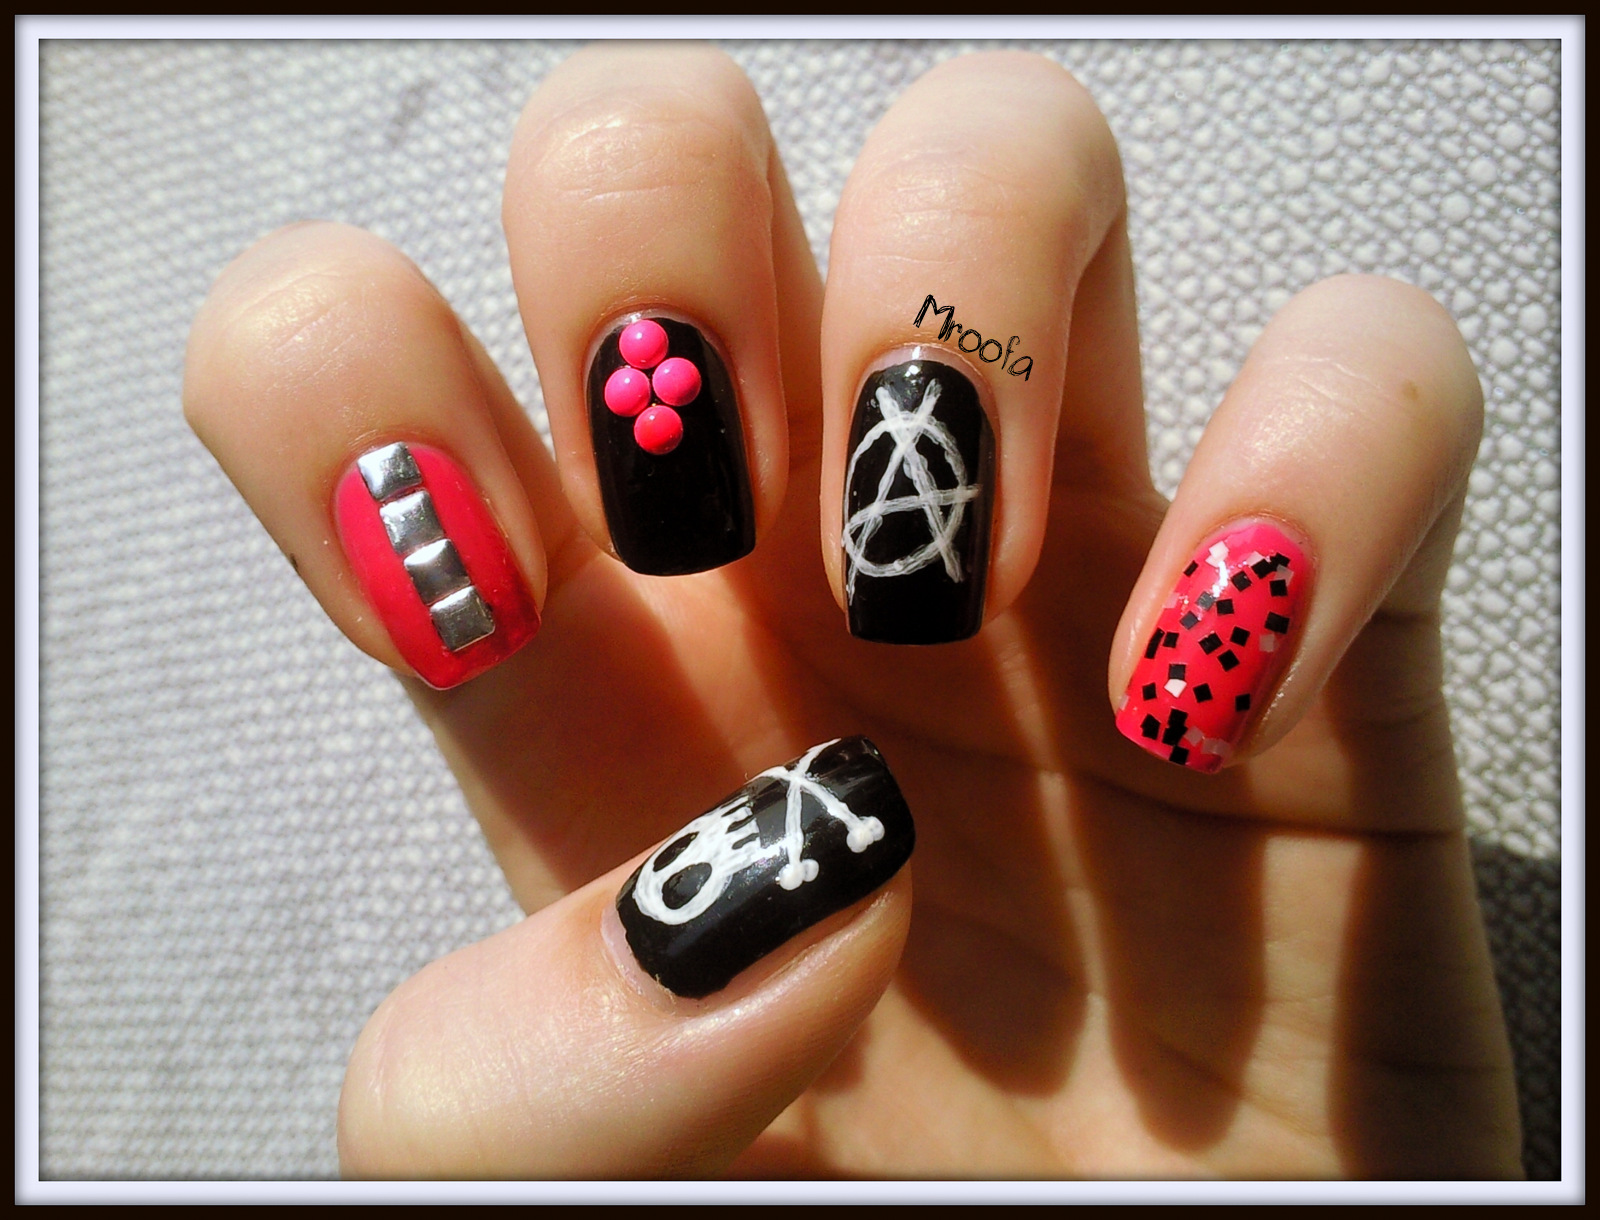 7. "Spiked Nail Designs for a Punk Vibe" - wide 2